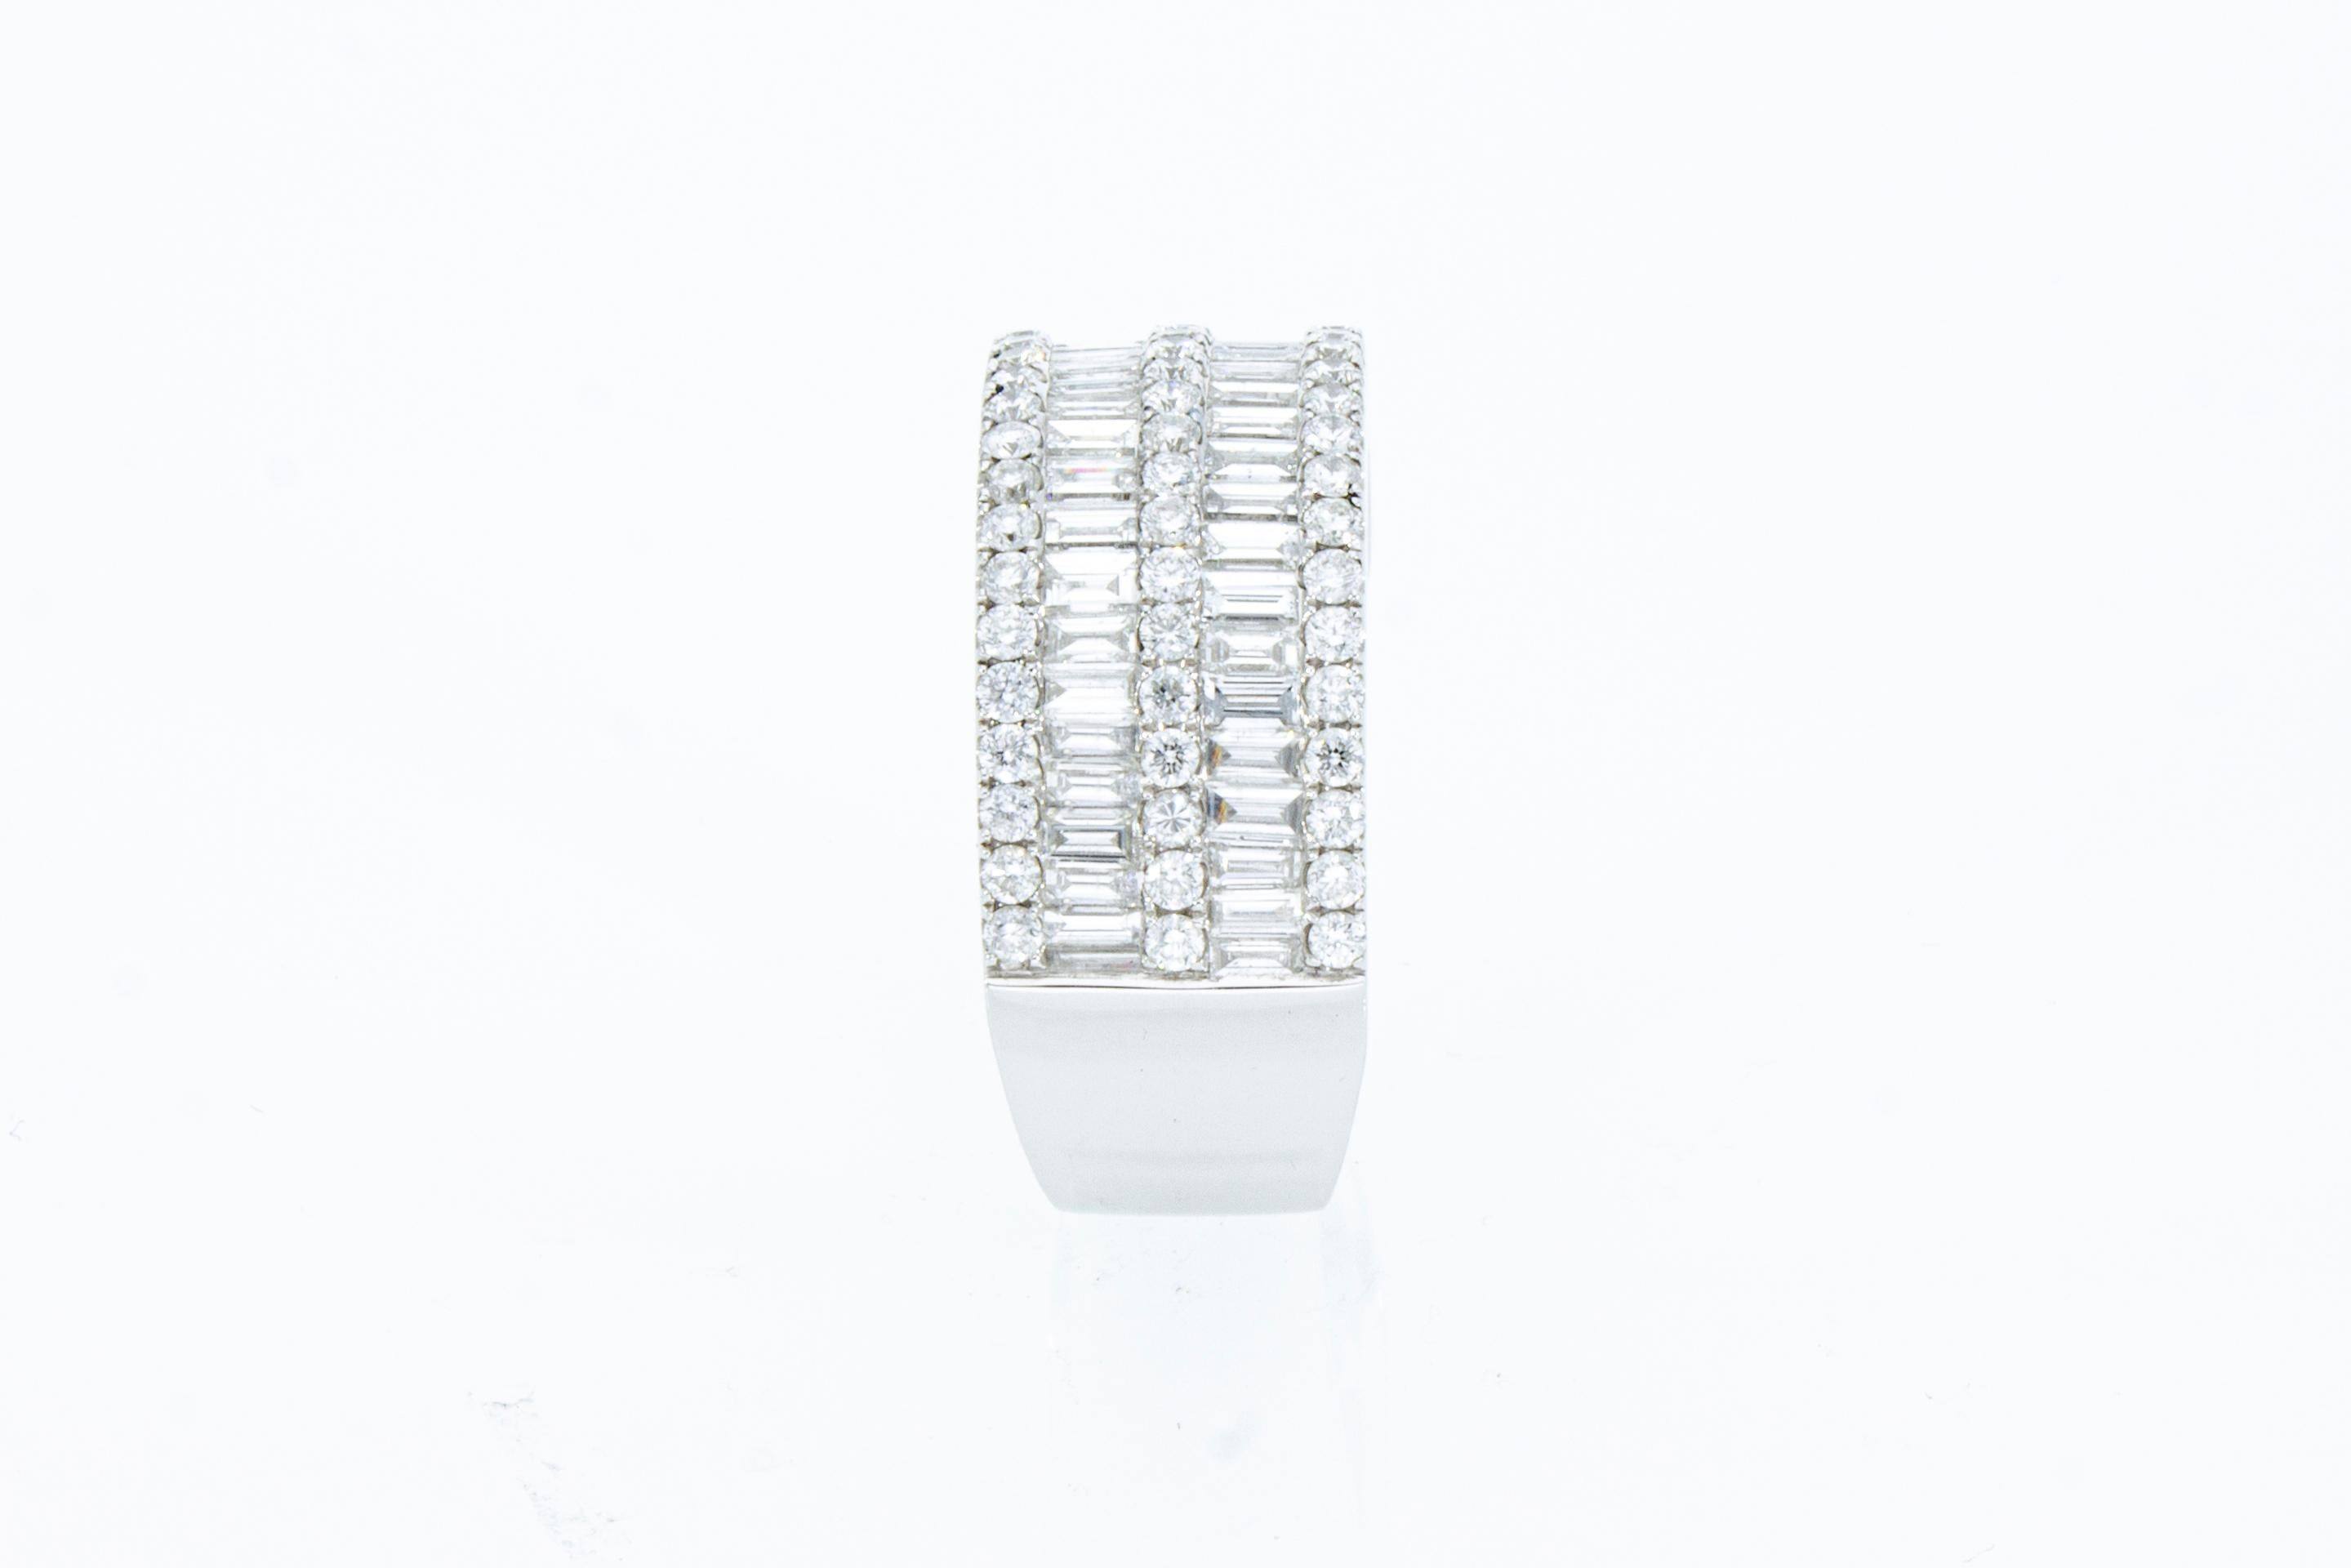 Band Ring with 2.03 Ct of Brilliant and Baguette Cut Diamonds, 18 Kt White Gold  For Sale 2